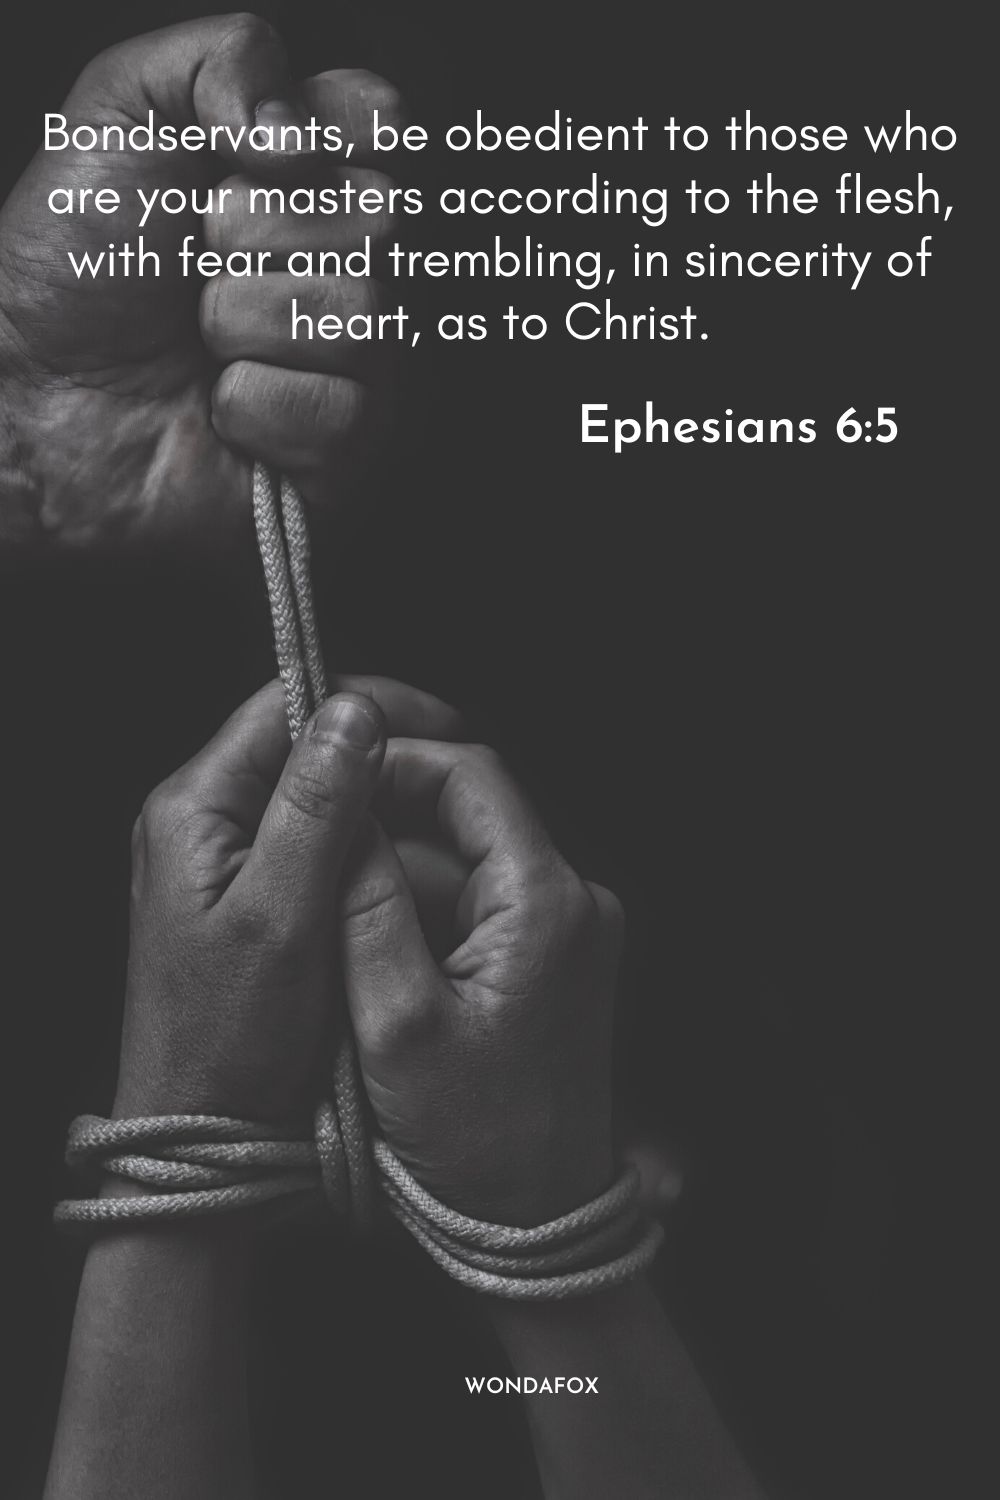 Bondservants, be obedient to those who are your masters according to the flesh, with fear and trembling, in sincerity of heart, as to Christ.
Ephesians 6:5